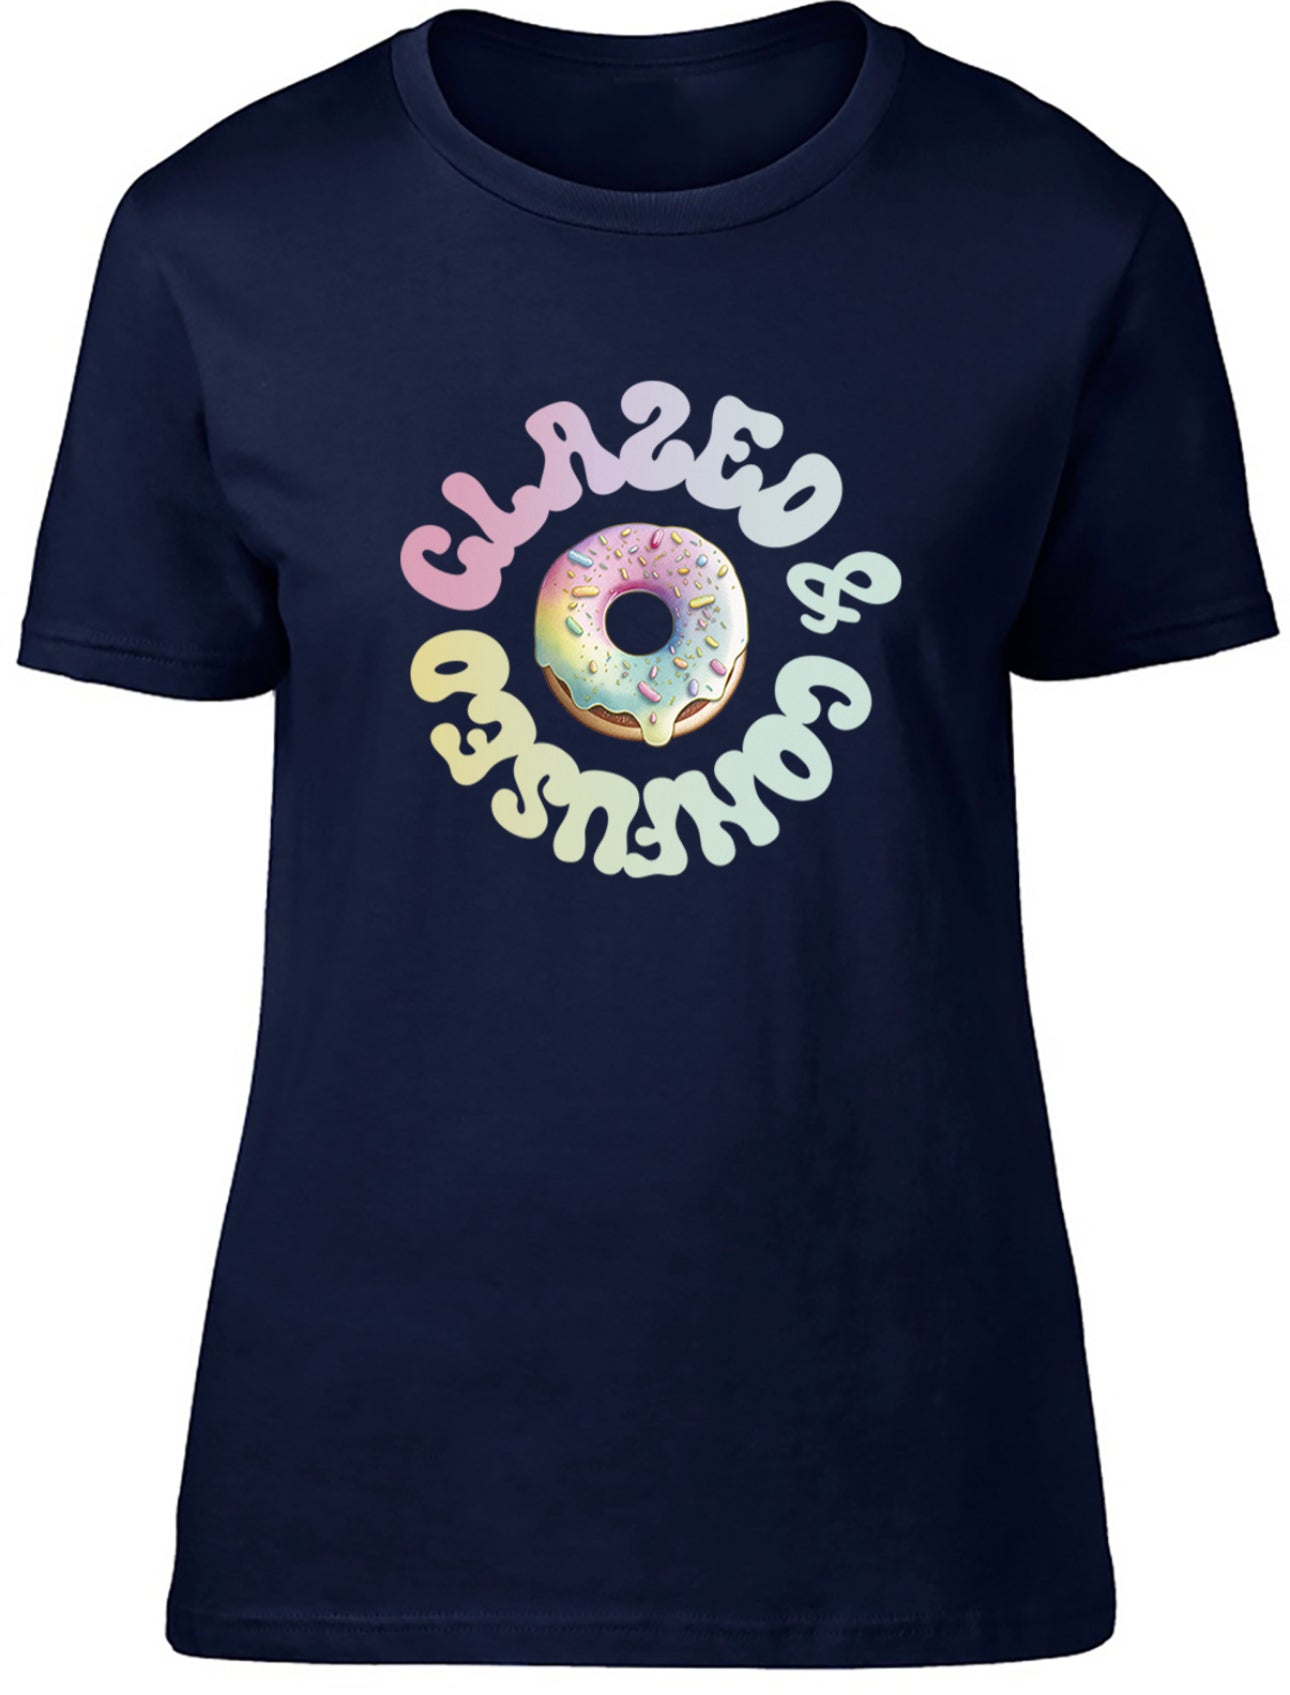 Glazed and Confused Women’s T-shirt